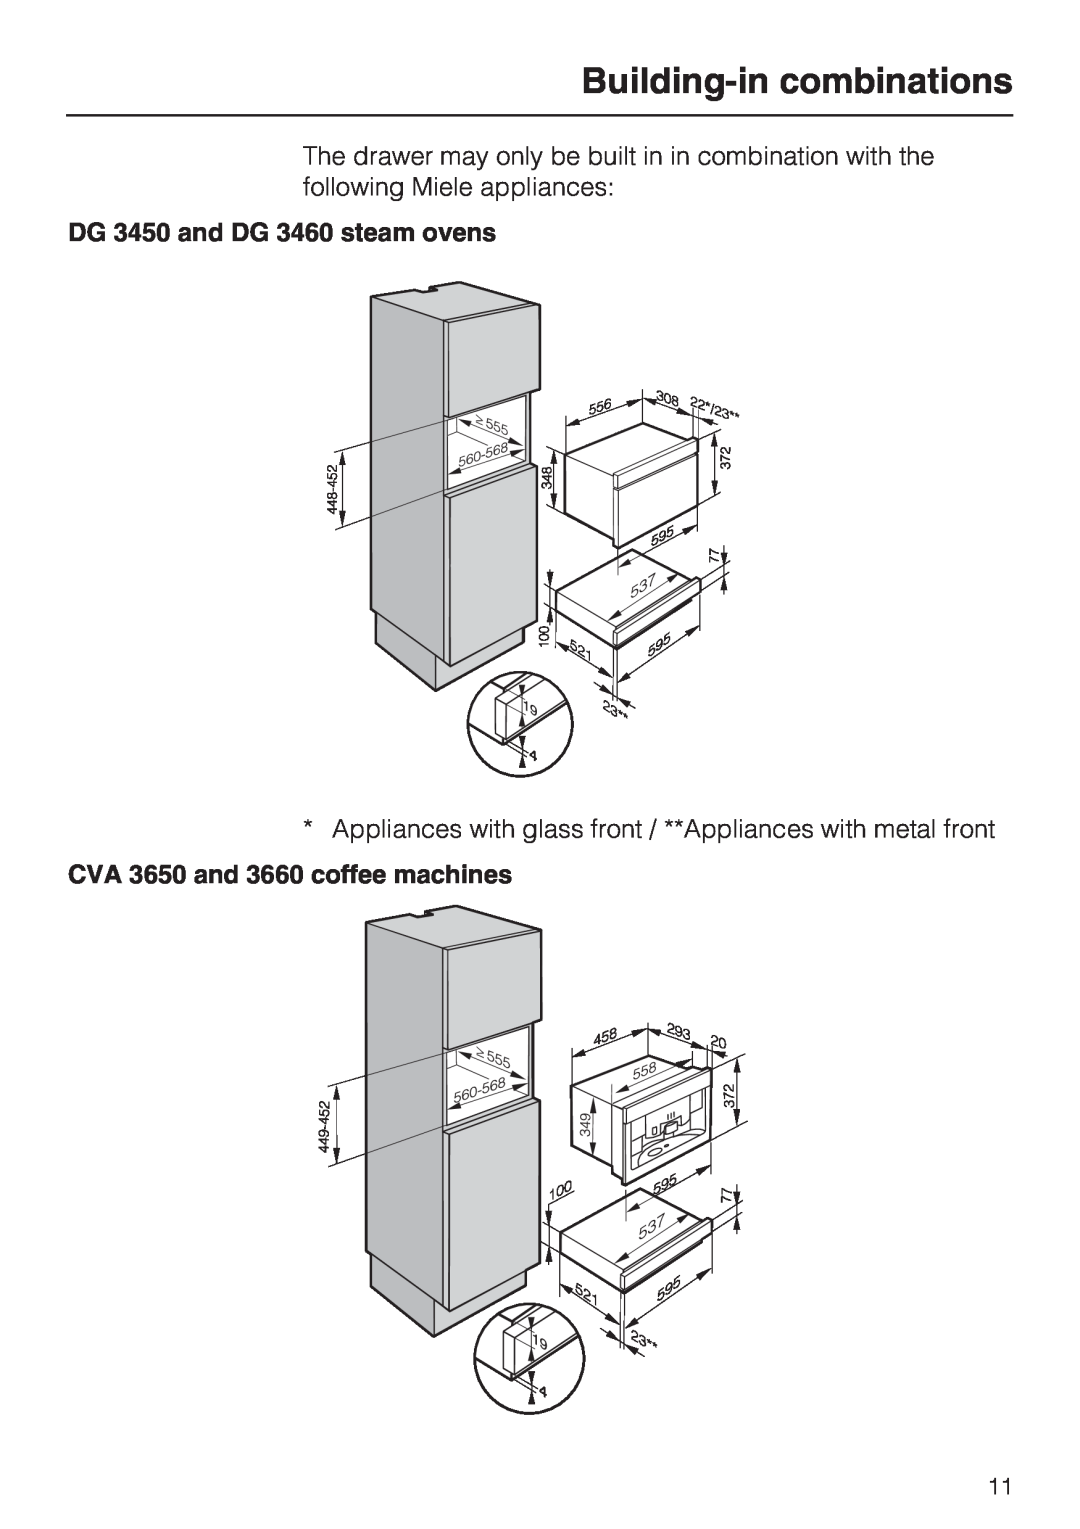 Miele ESS 3060-10 Building-incombinations, DG 3450 and DG 3460 steam ovens, CVA 3650 and 3660 coffee machines 